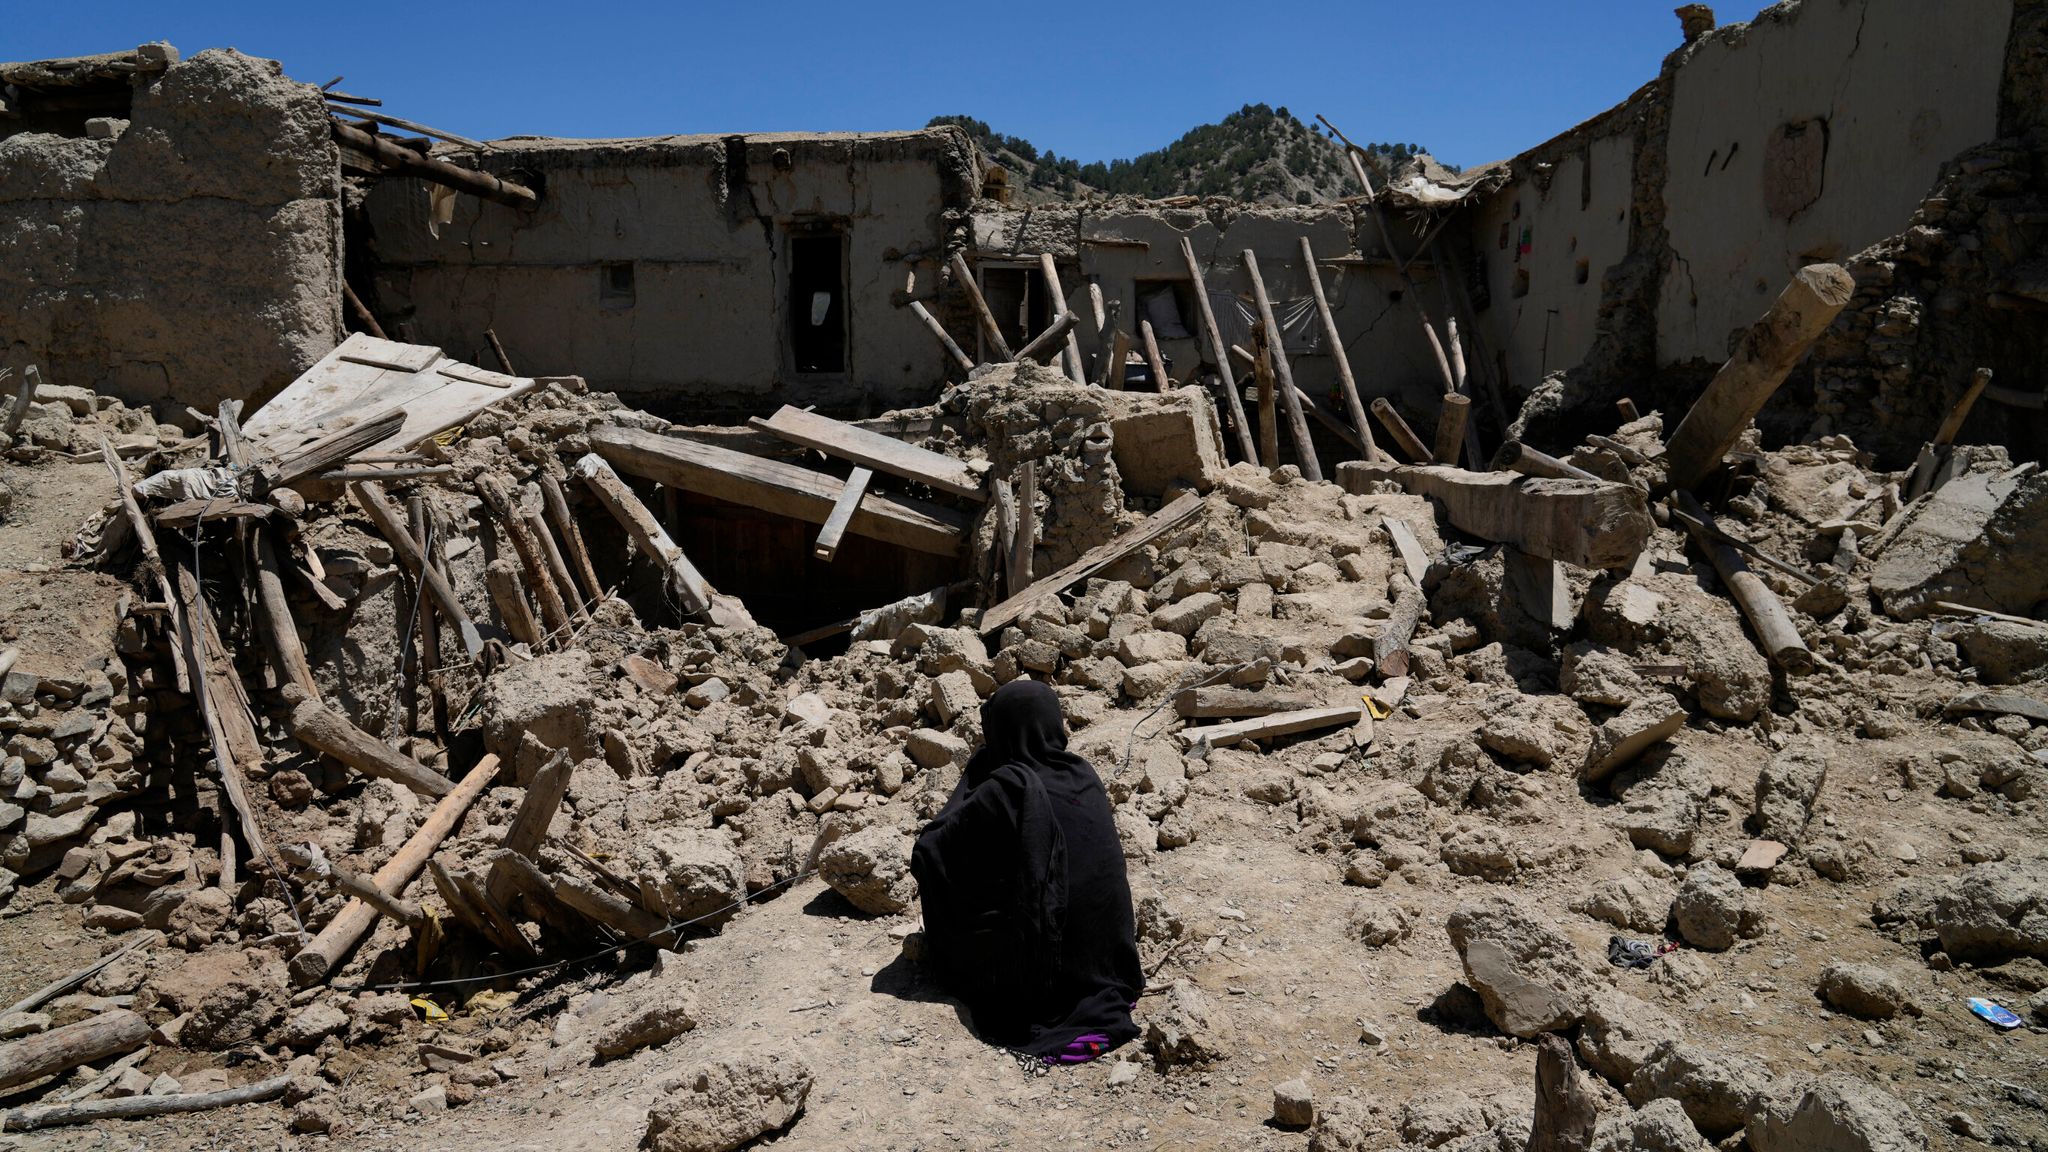 Afghanistan earthquake People call for help from international